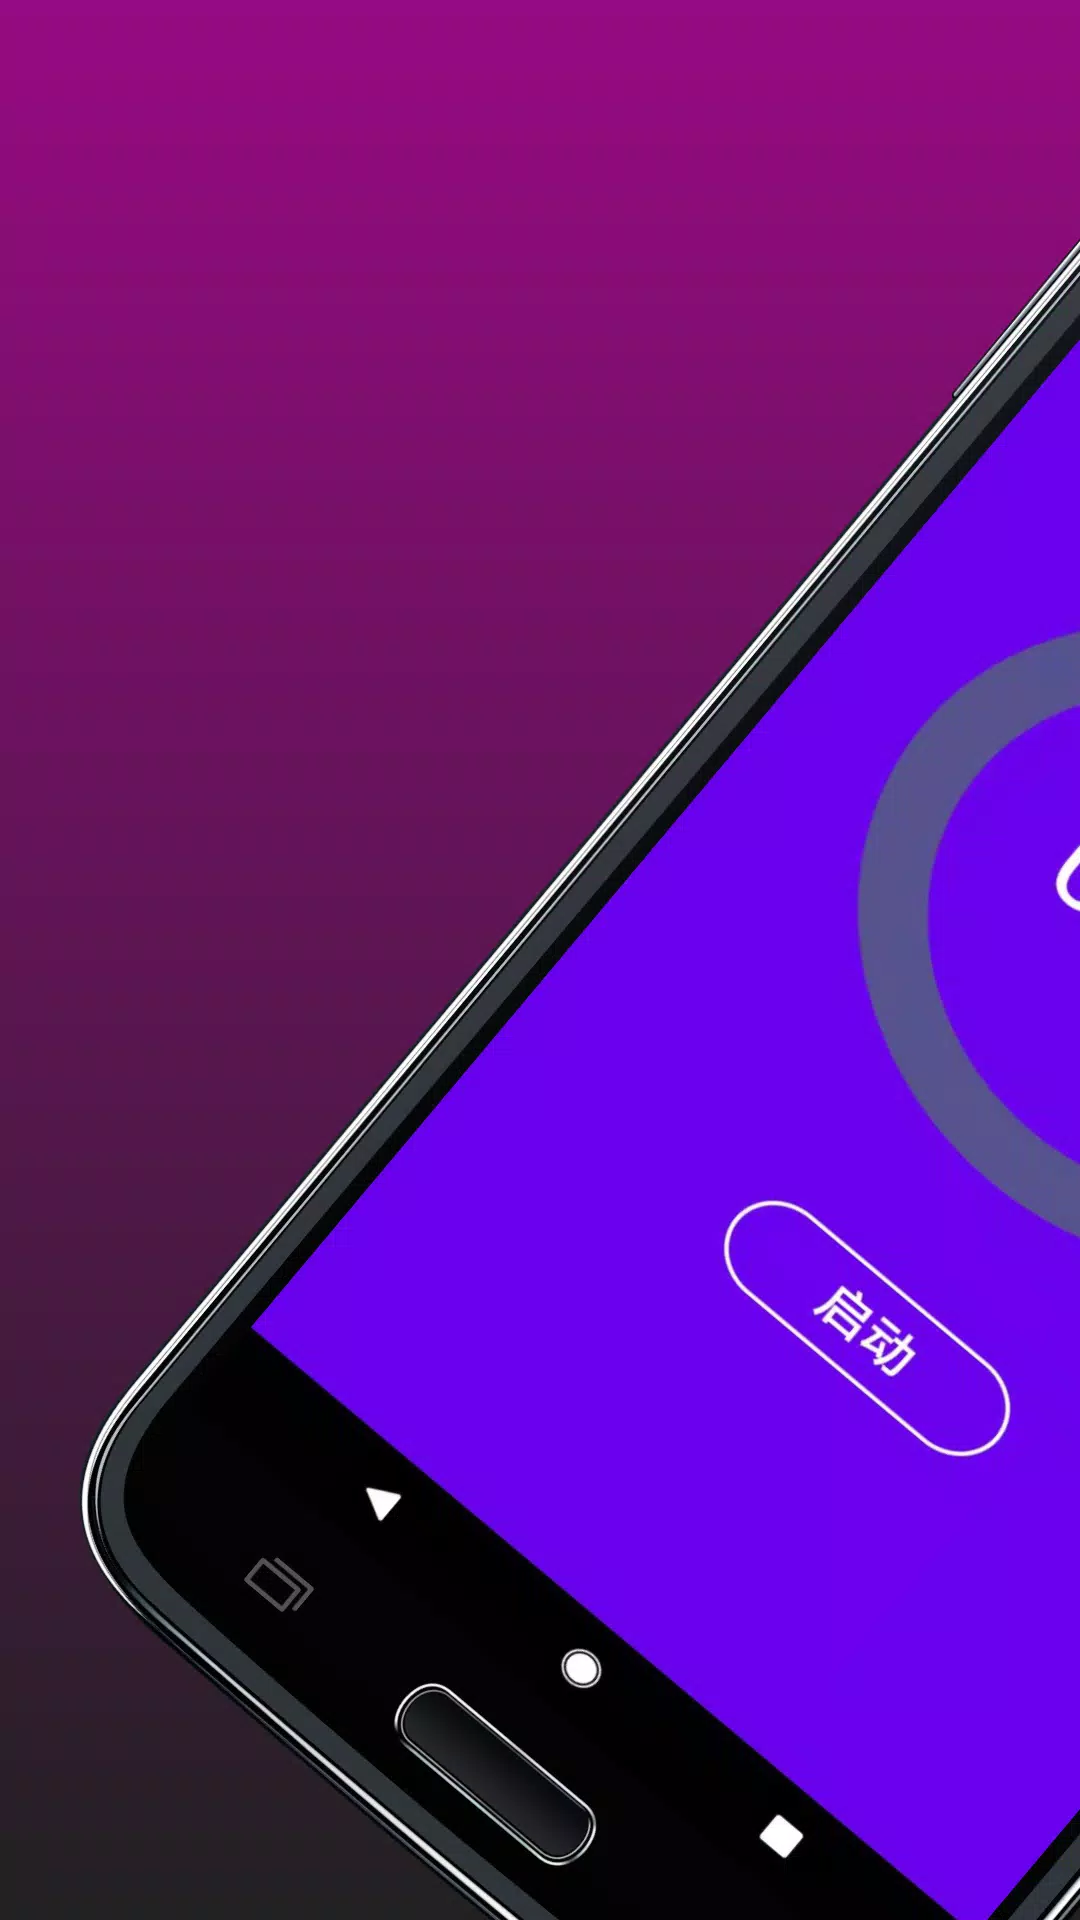 Sleep Timer (Turn off music & video & screen) for Android - APK Download